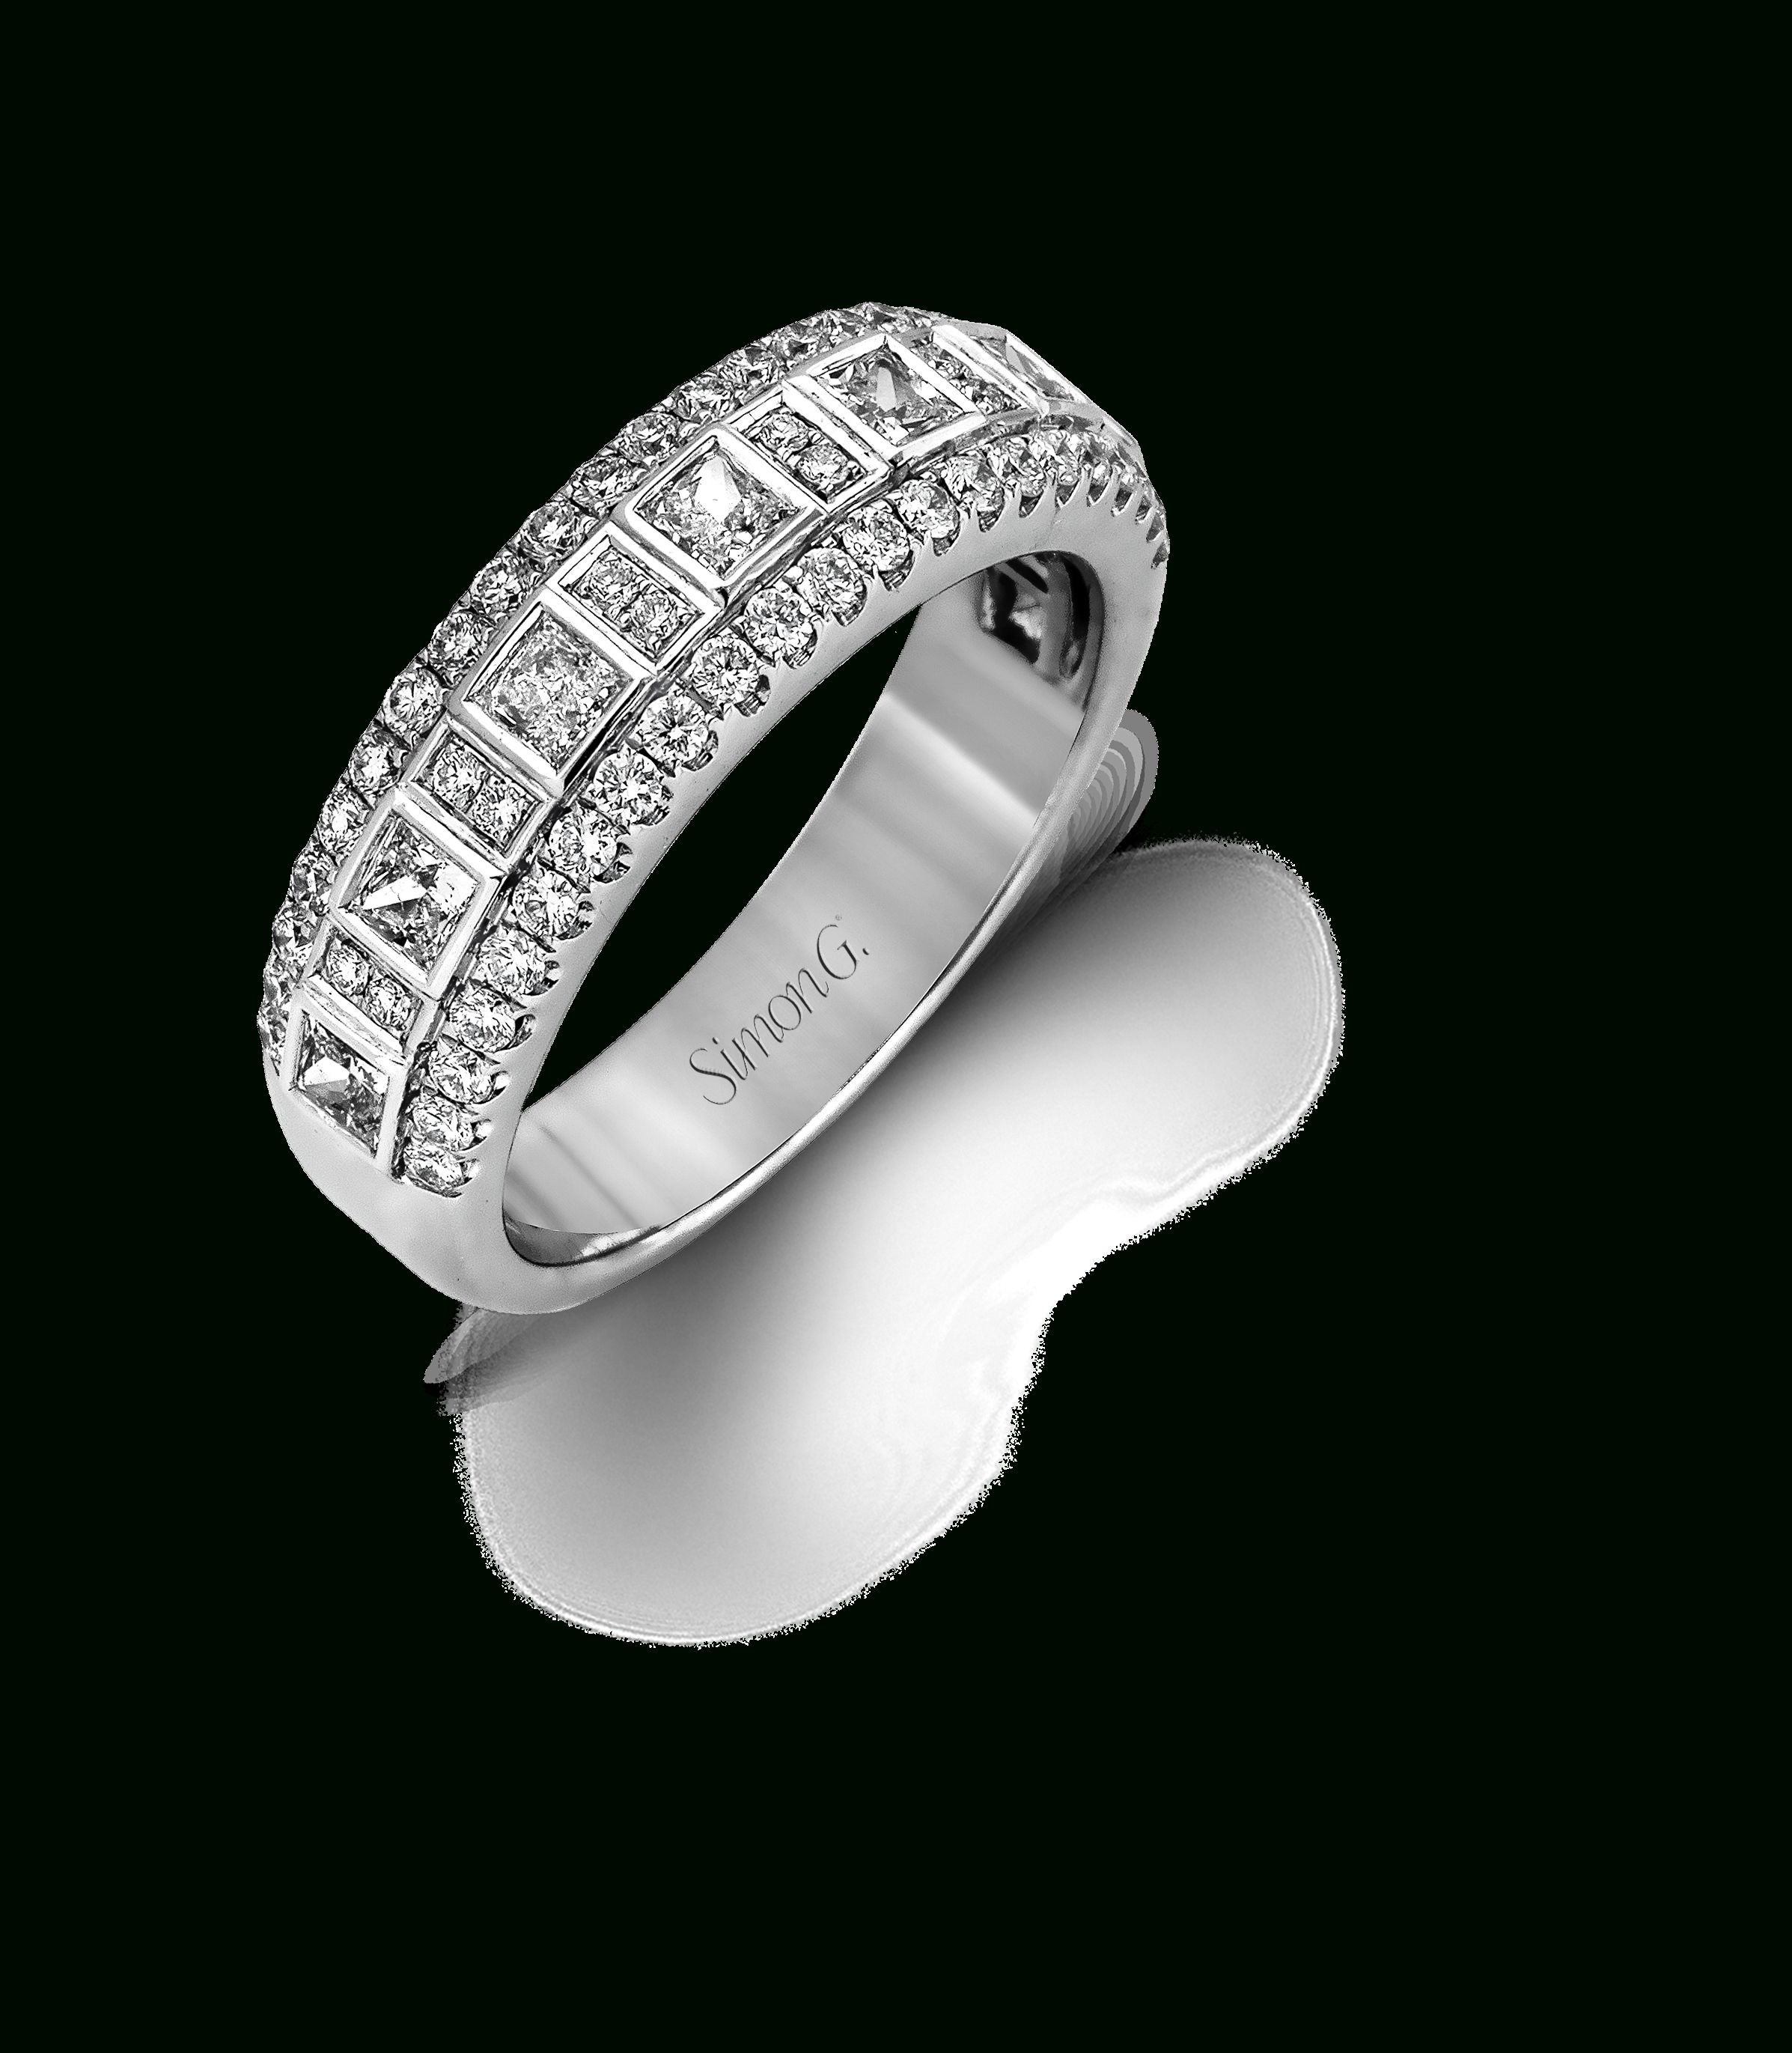 Mr1594 Anniversary Band | Riveting Rings | Vintage Diamond Pertaining To Most Recent Princess Cut And Round Diamond Anniversary Bands In White Gold (View 3 of 25)